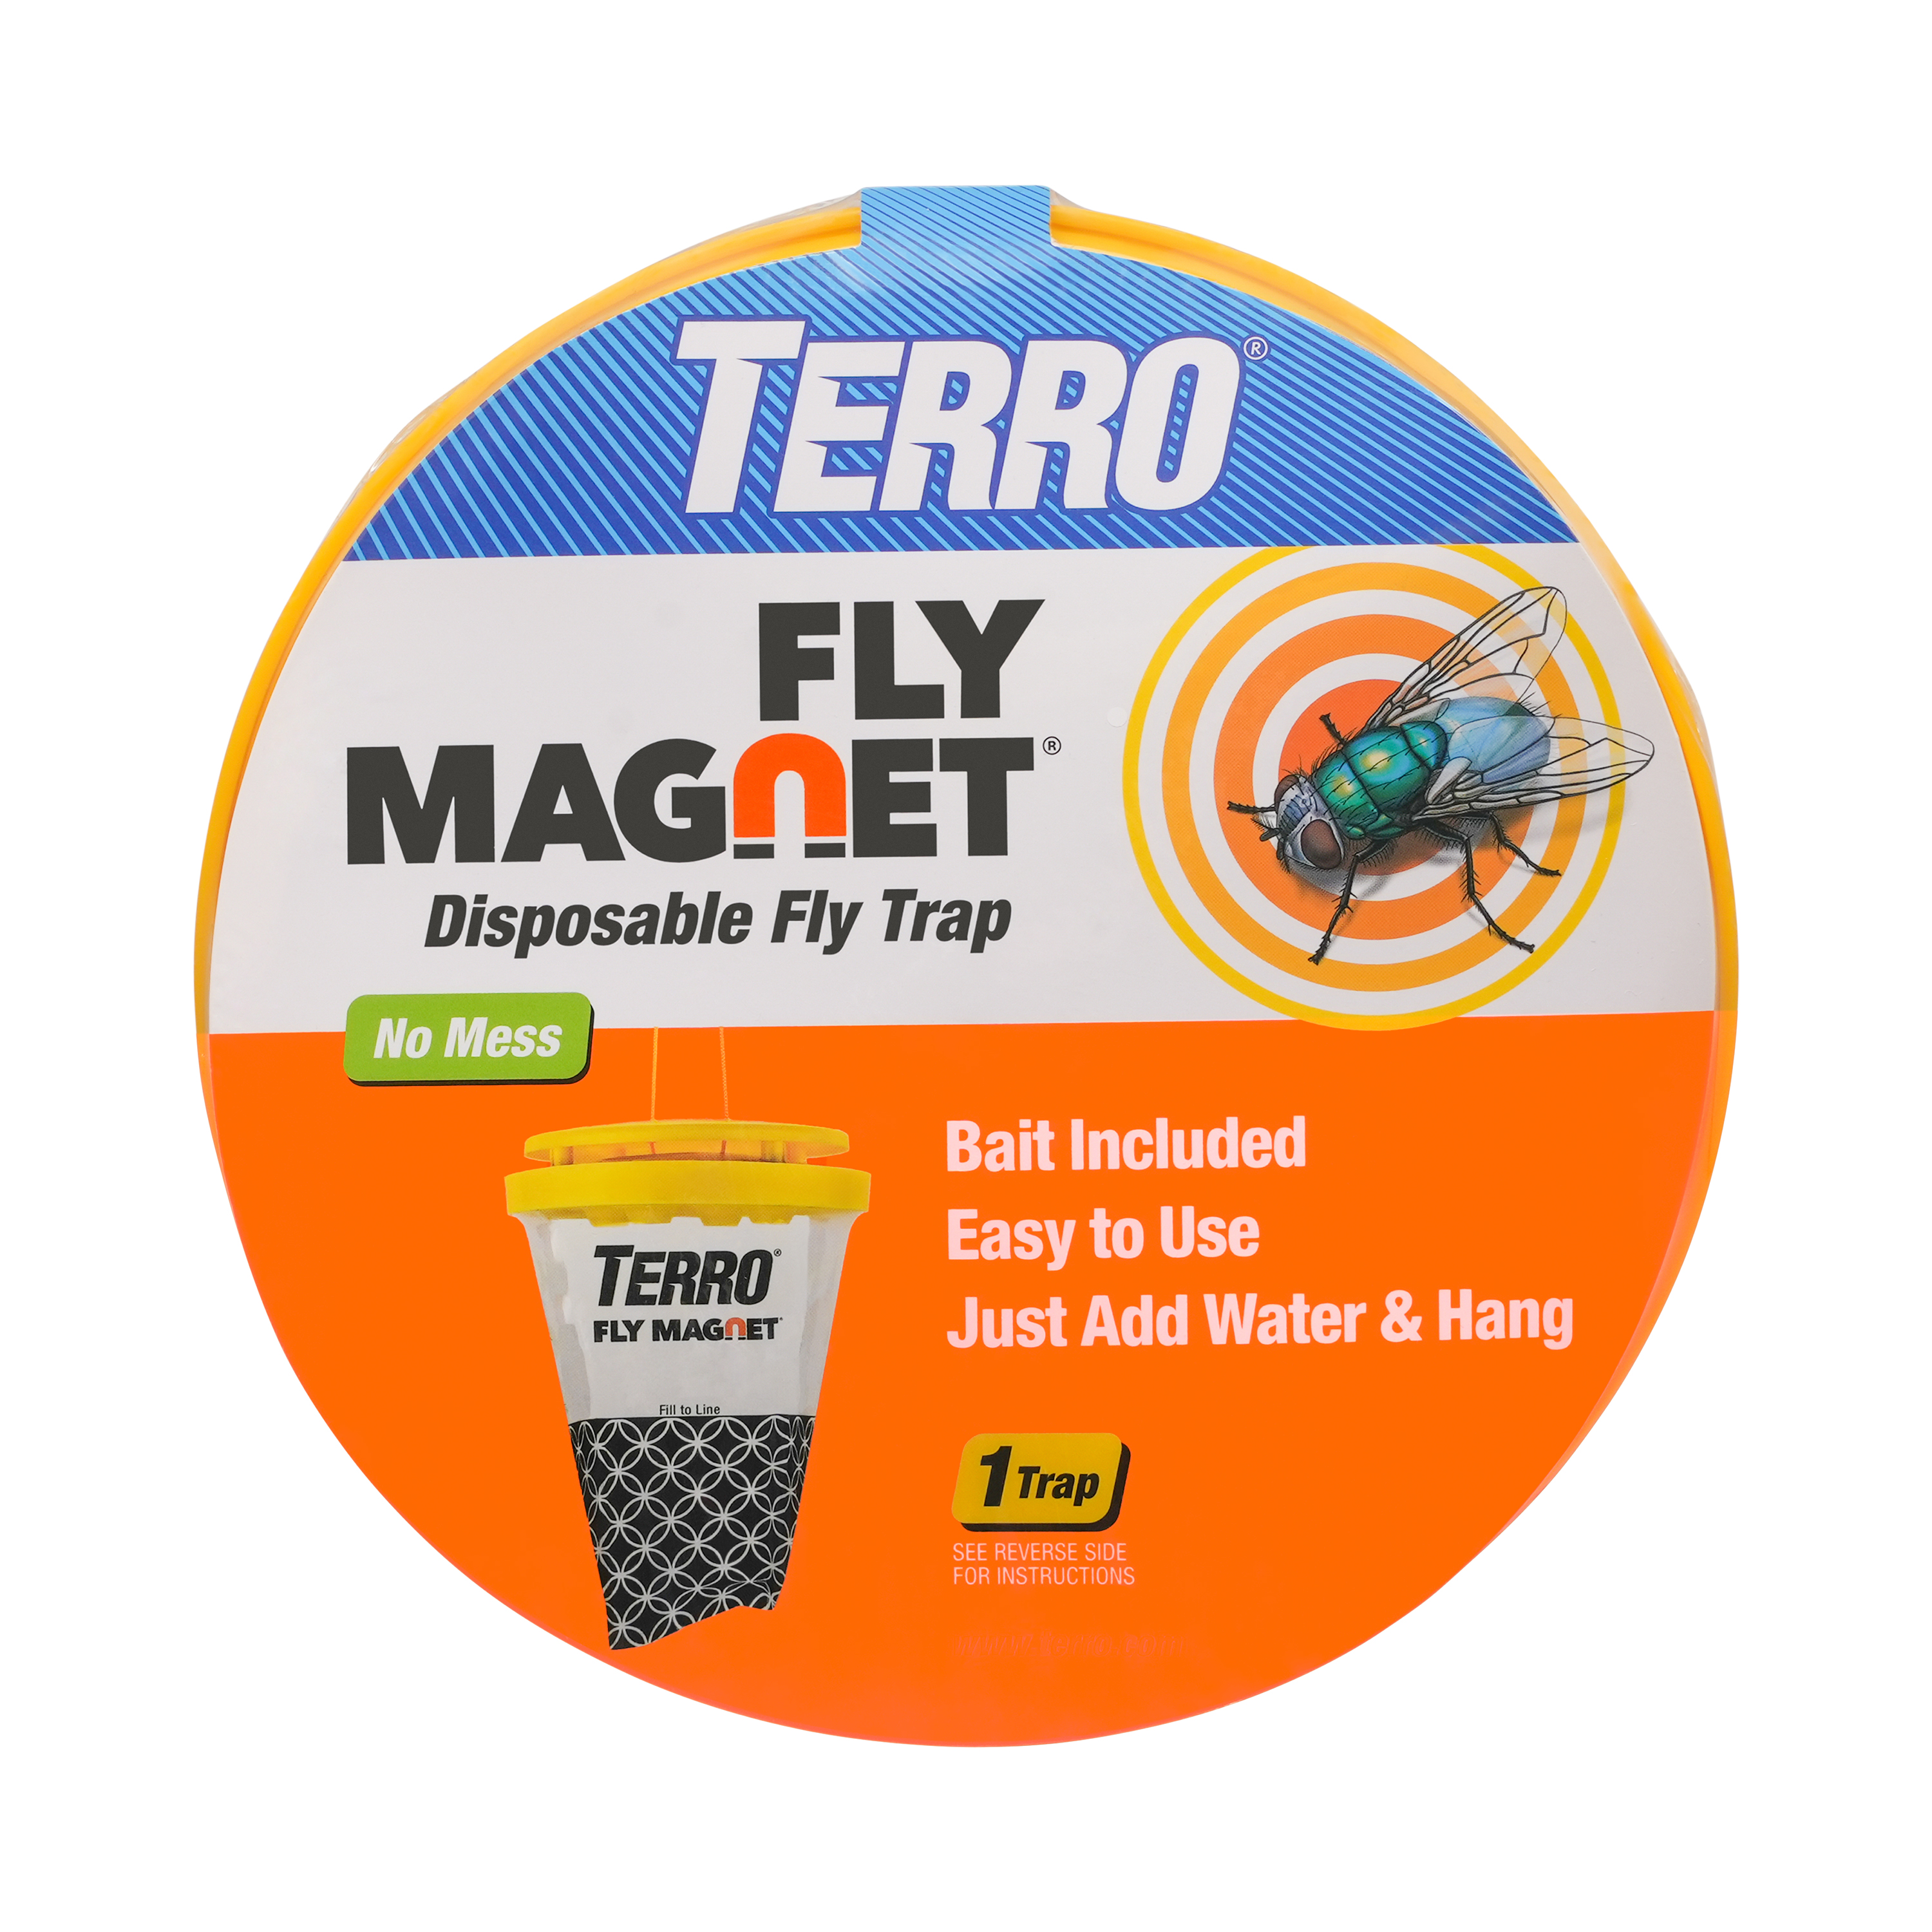 Terro Fly Magnet Disposable Fly Trap - image 2 of 3